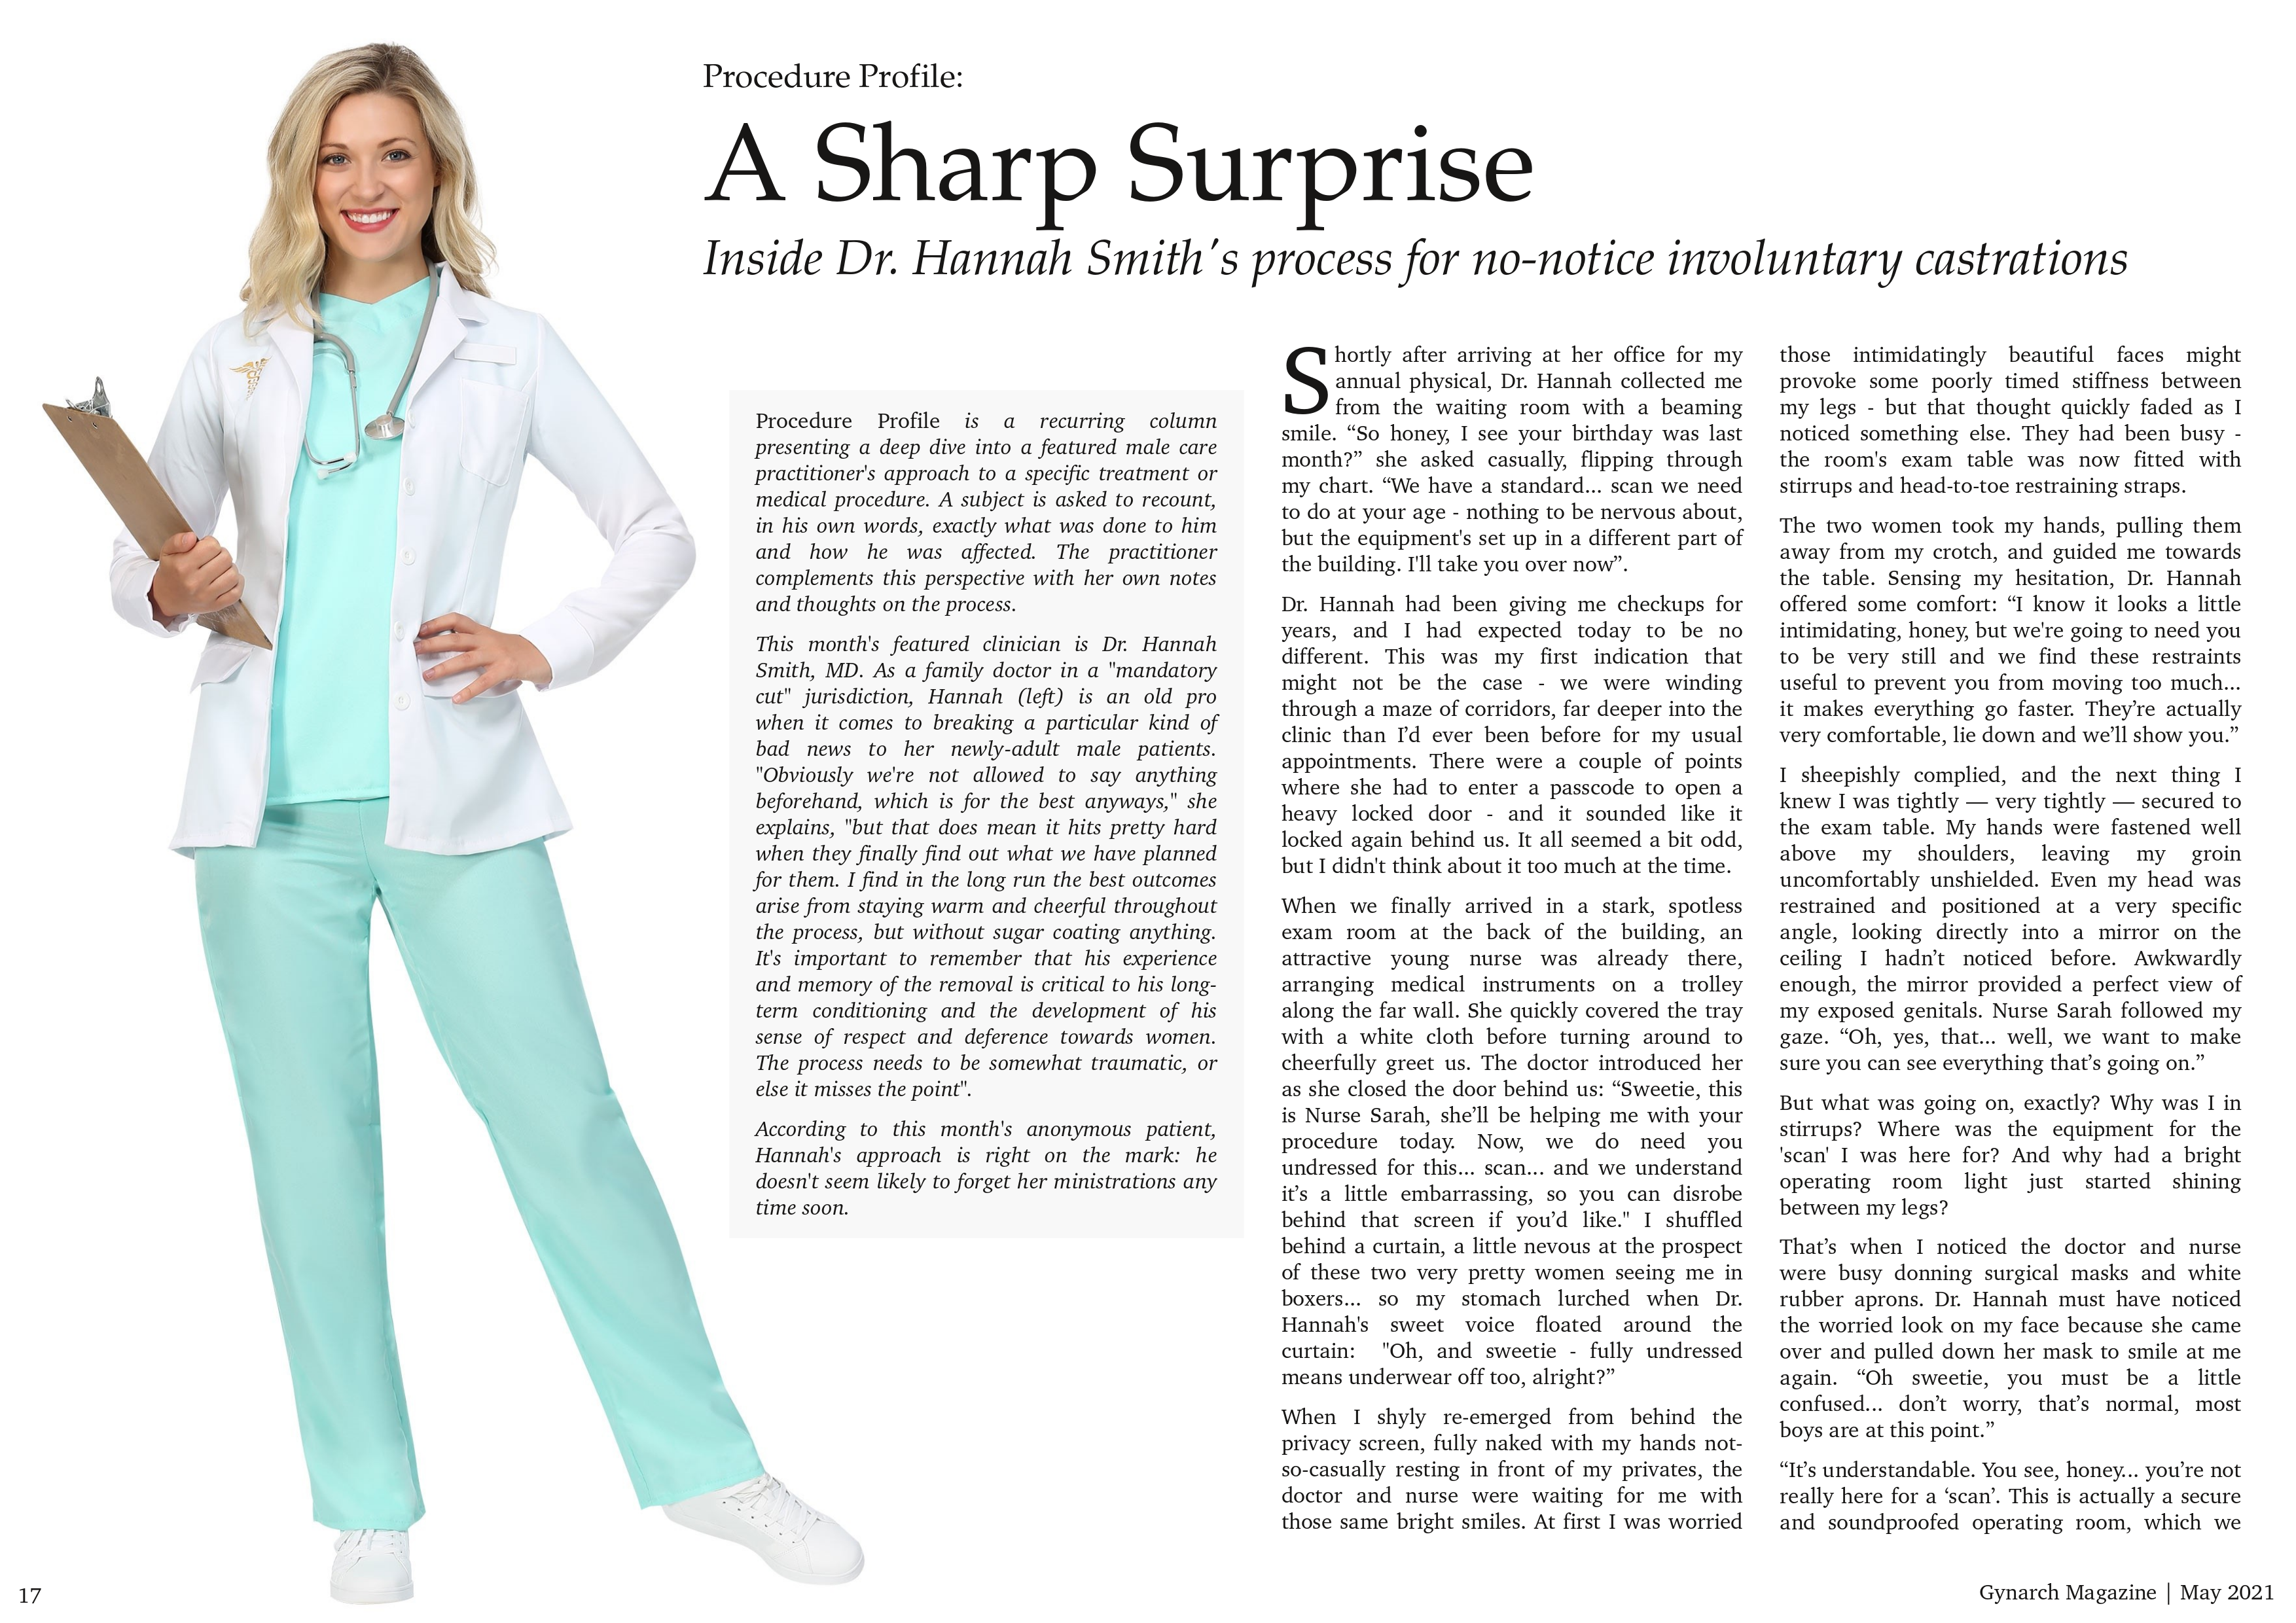 Inside Dr. Hannah Smith's process for no-notice involuntary castrations Procedure Profile: A Sharp Surprise, Gynarch Magazine, May 2021, p17-18
